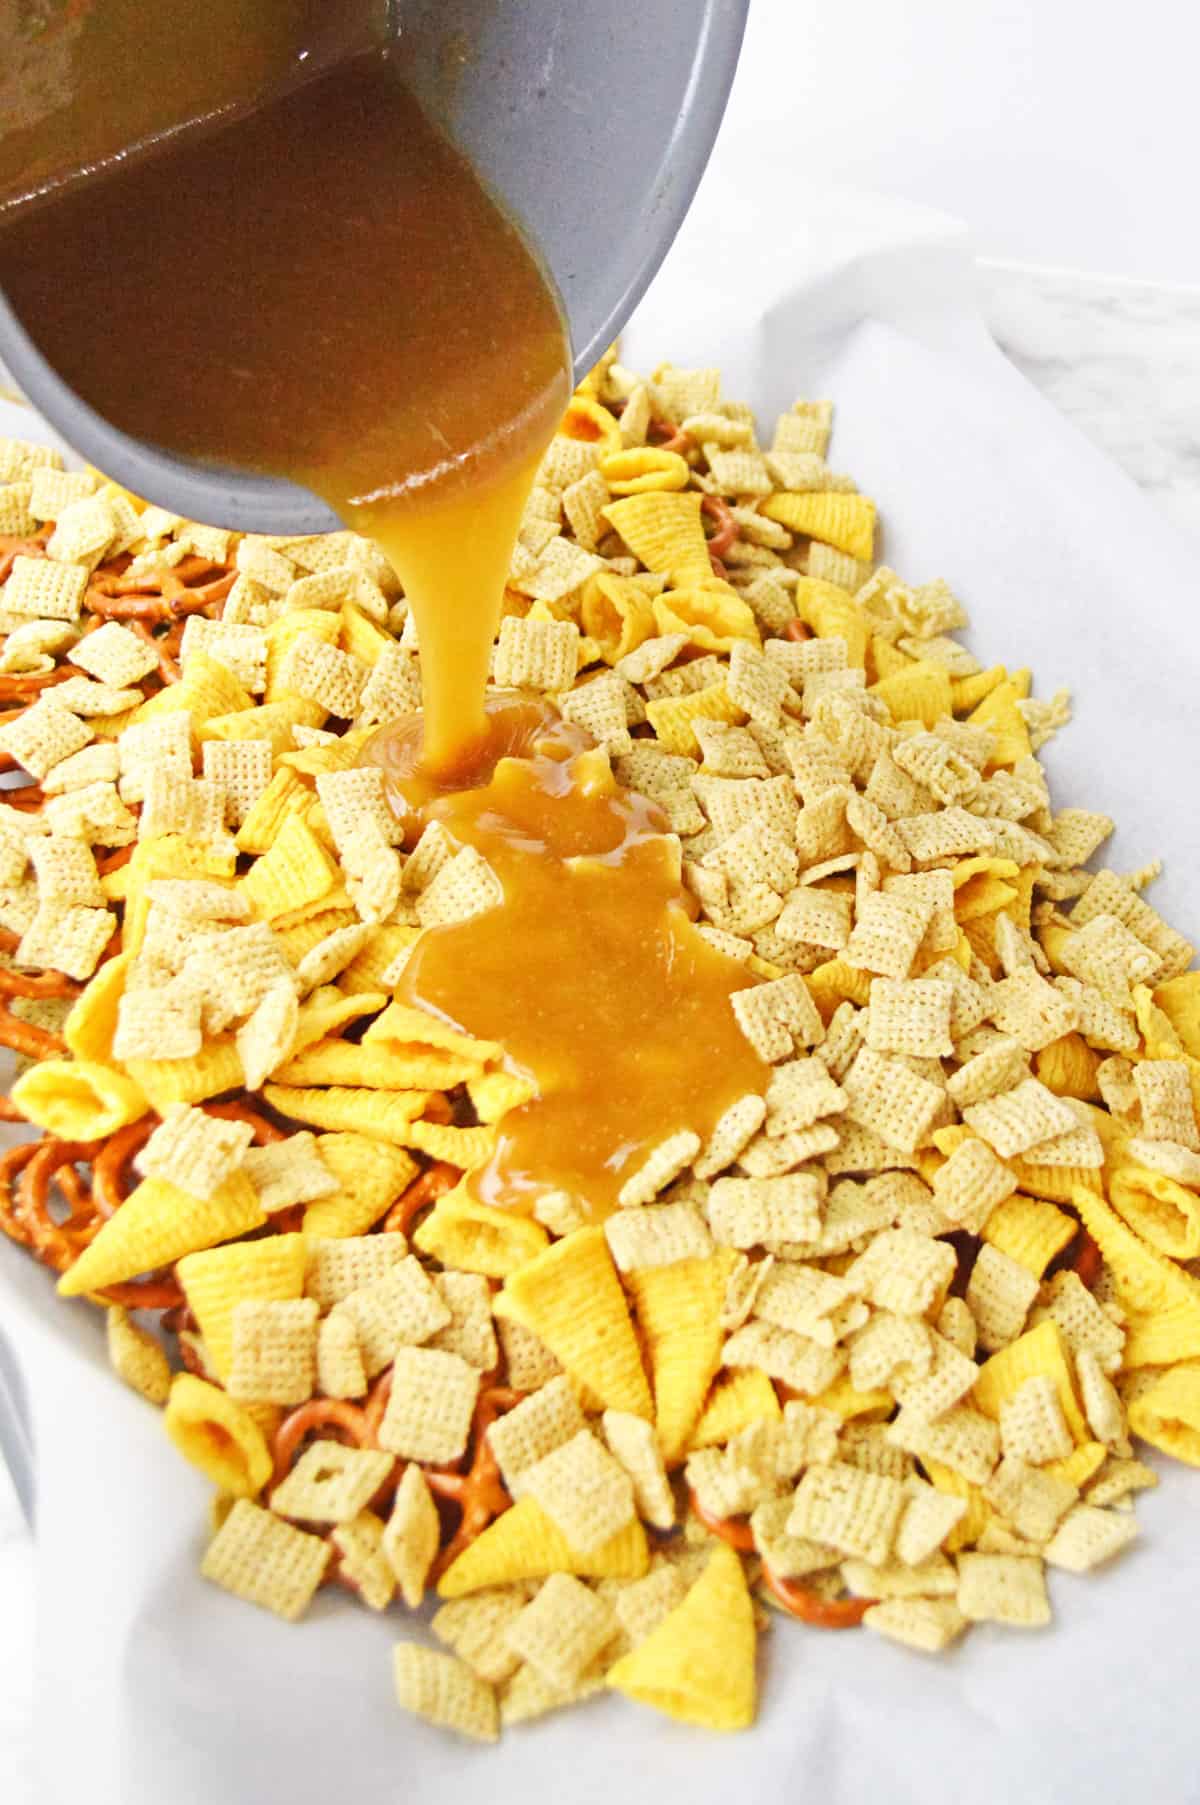 Caramel sauce being poured out of pot and over chex mix on lined baking sheet.